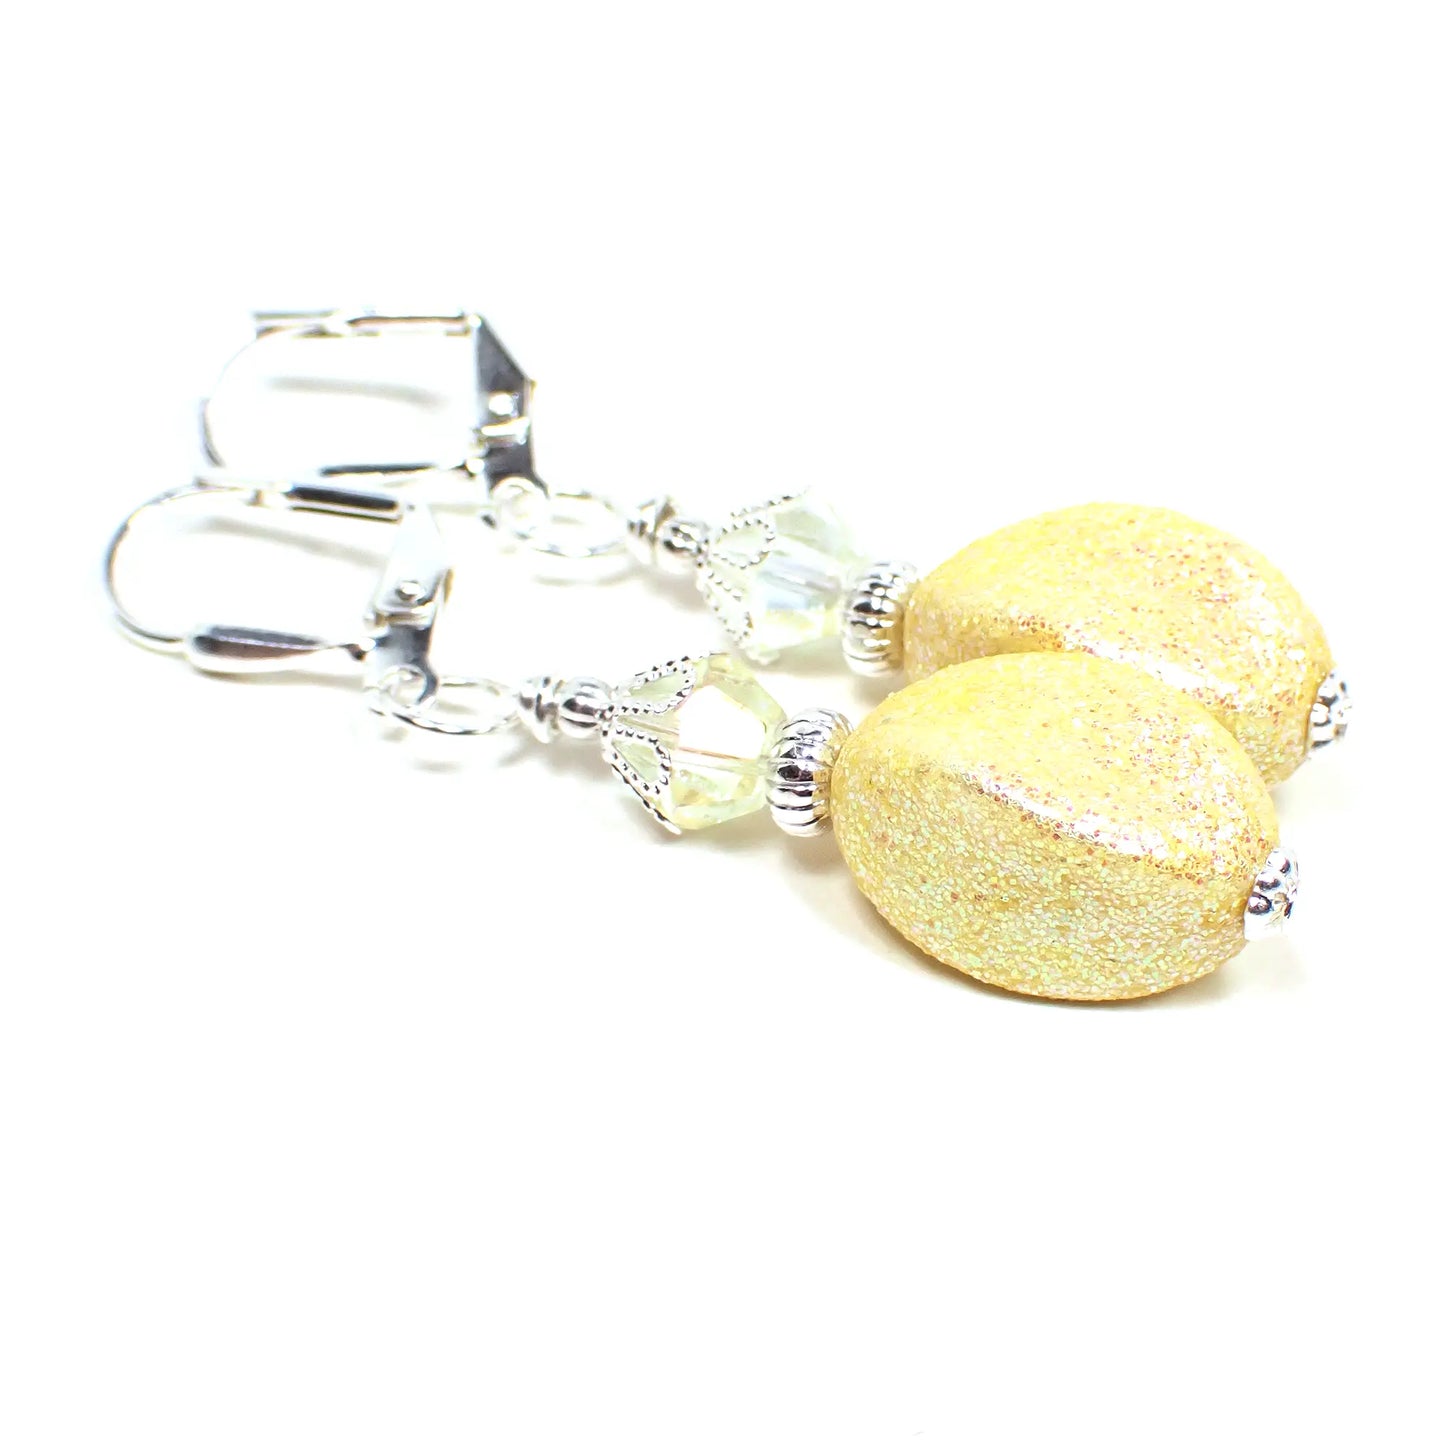 Handmade Drop Earrings with Light Yellow Vintage Acrylic Glitter Beads Silver Plated Hook Lever Back or Clip On